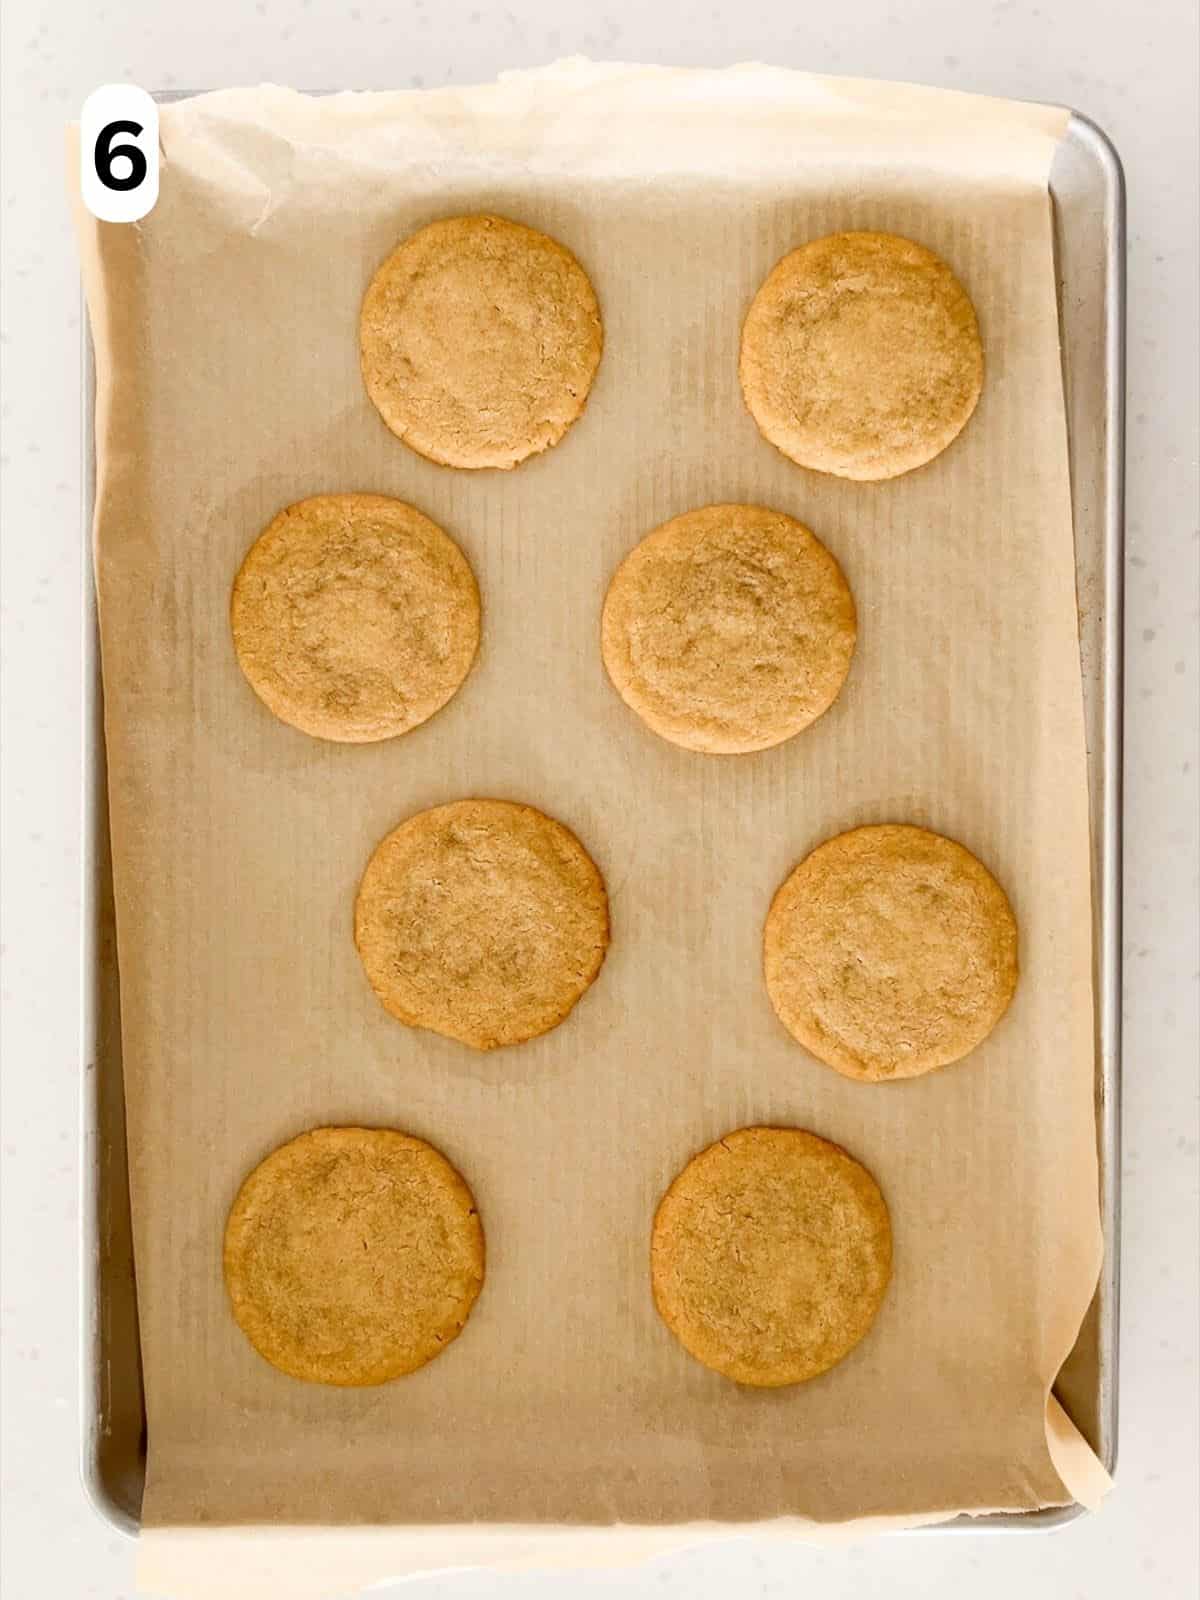 The cookies are baked until the edges are crisp and lightly golden.